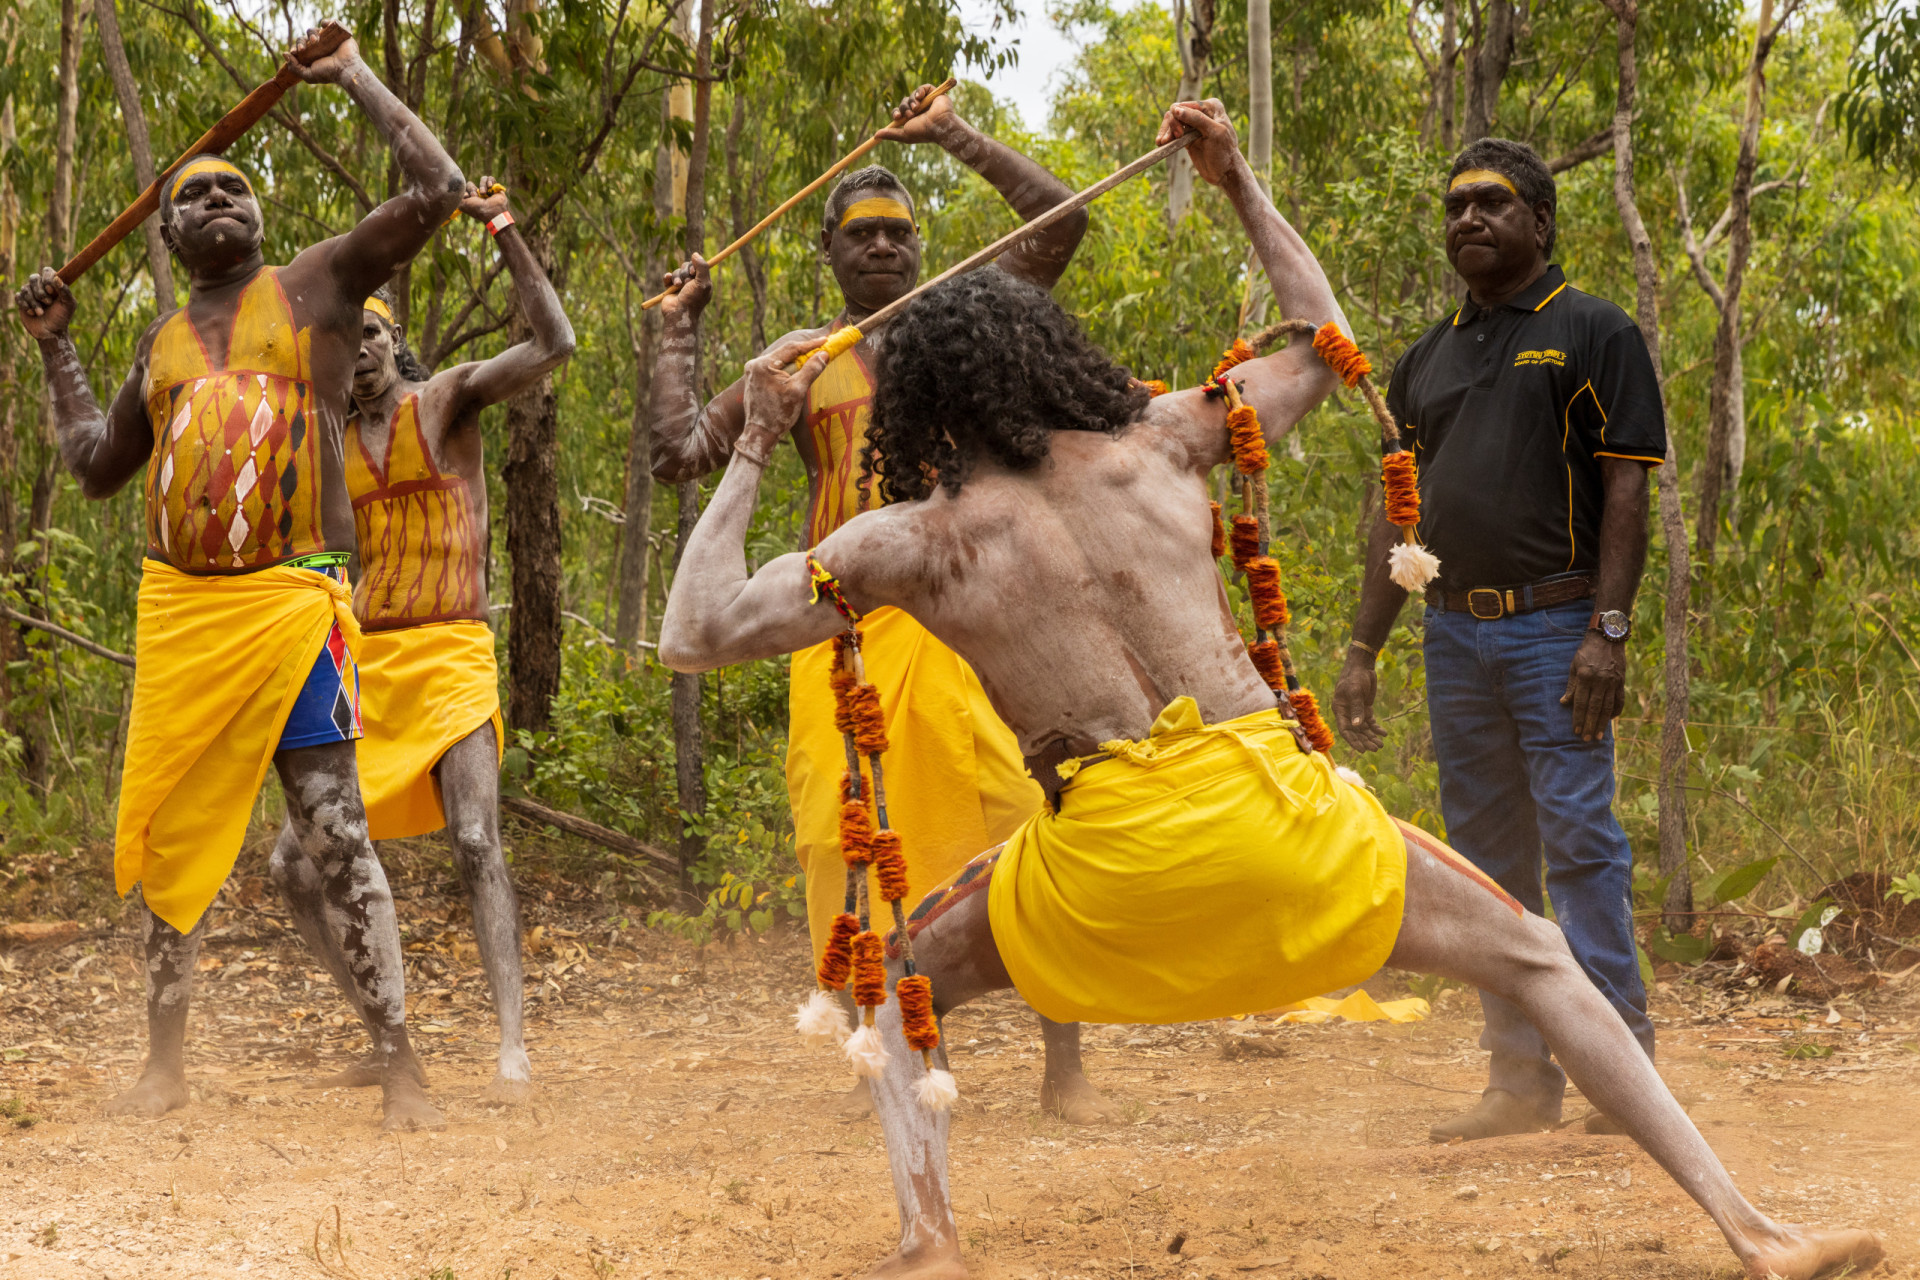 <p>Dance is an important feature in Aboriginal and Torres Strait Islander cultures, used in ceremonies to tell stories and pass on traditions.</p><p><a href="https://www.msn.com/en-us/community/channel/vid-7xx8mnucu55yw63we9va2gwr7uihbxwc68fxqp25x6tg4ftibpra?cvid=94631541bc0f4f89bfd59158d696ad7e">Follow us and access great exclusive content every day</a></p>